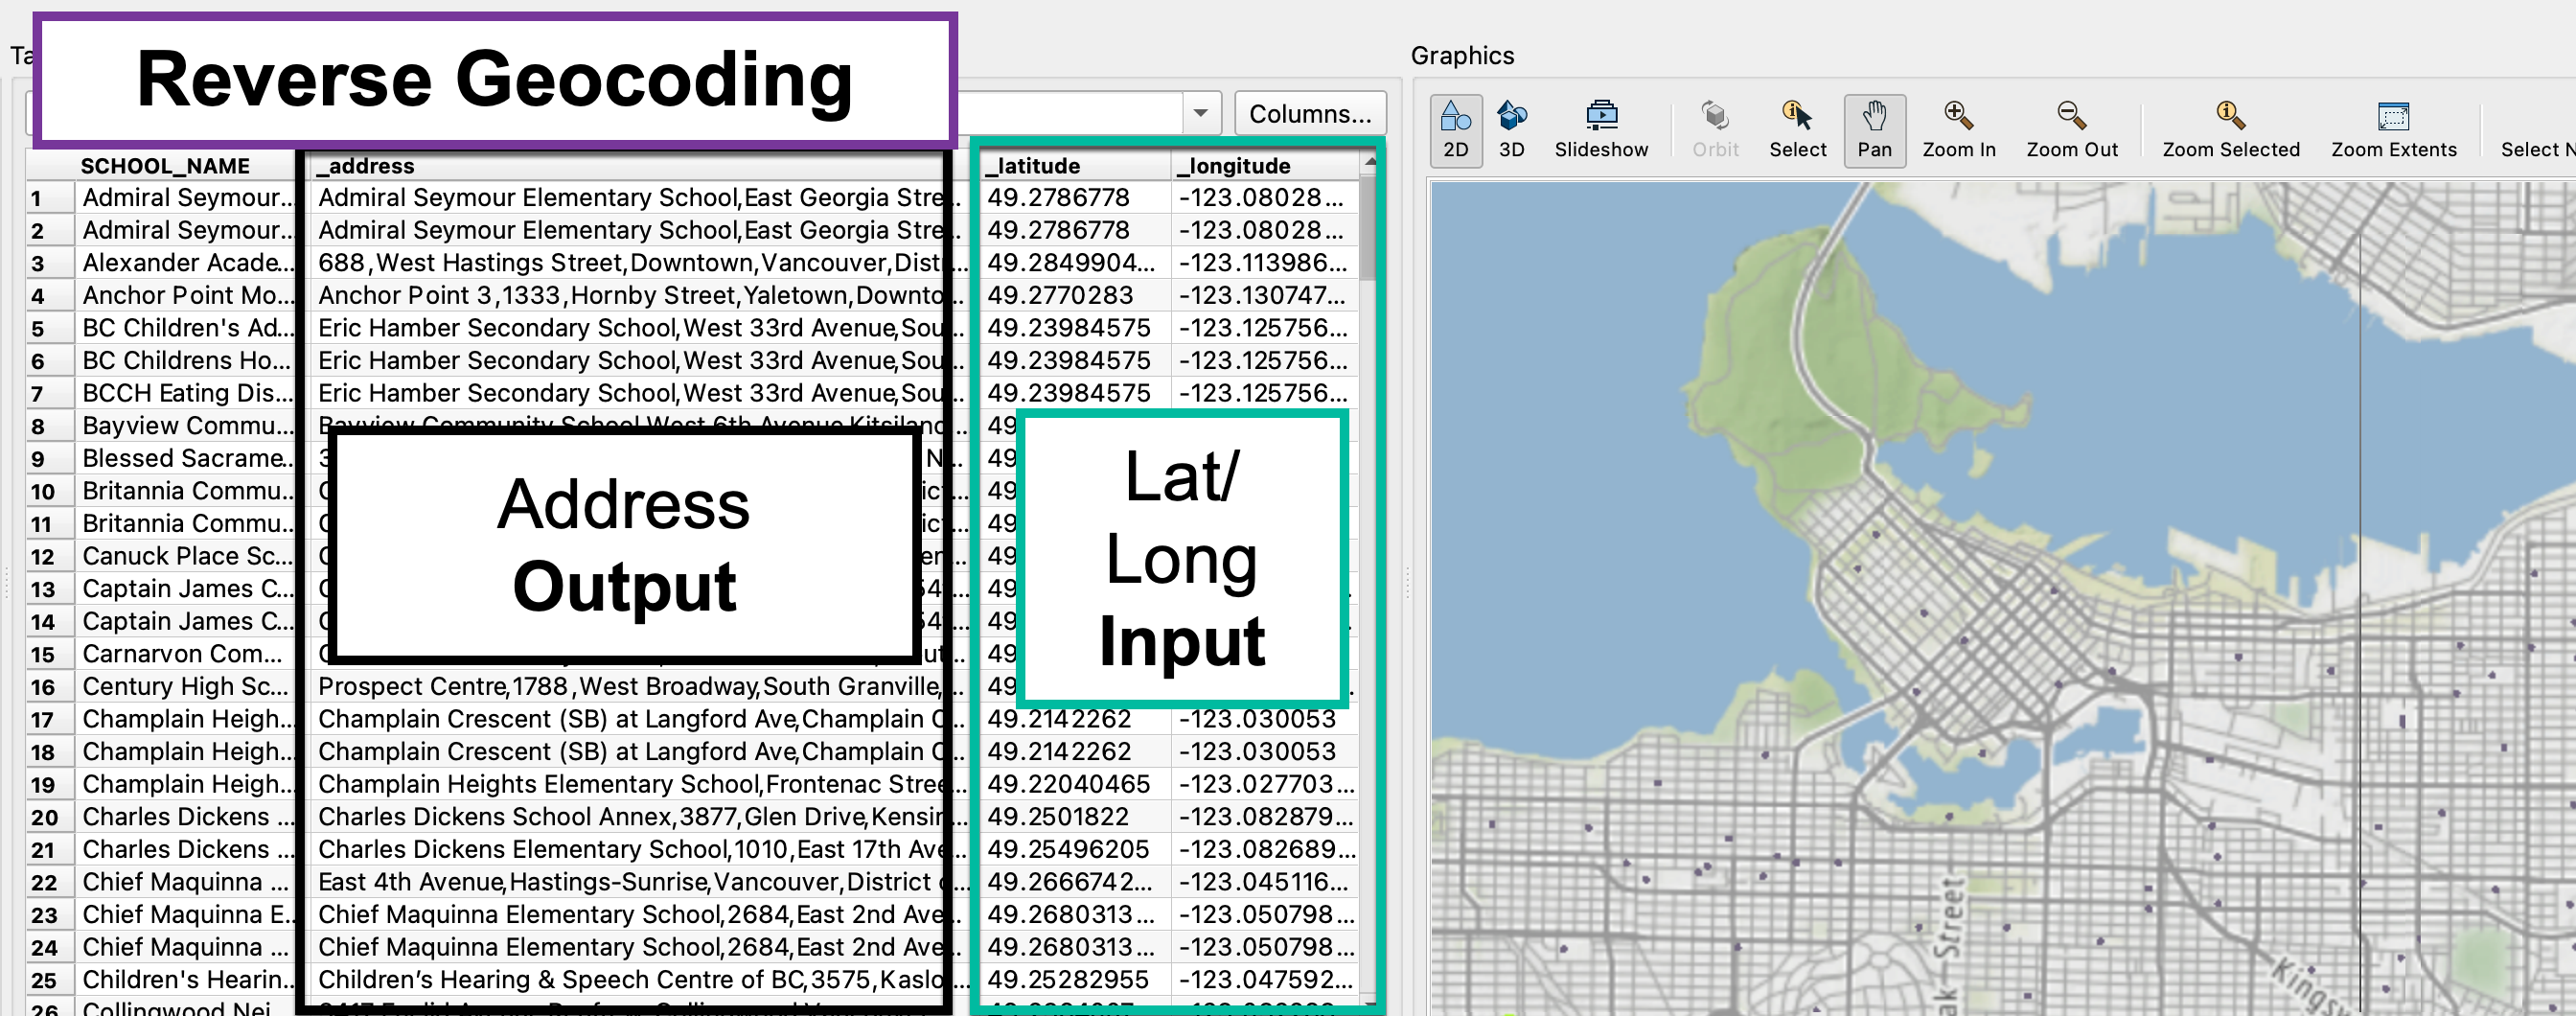 Can you explain the difference between geo coding and geo referencing?